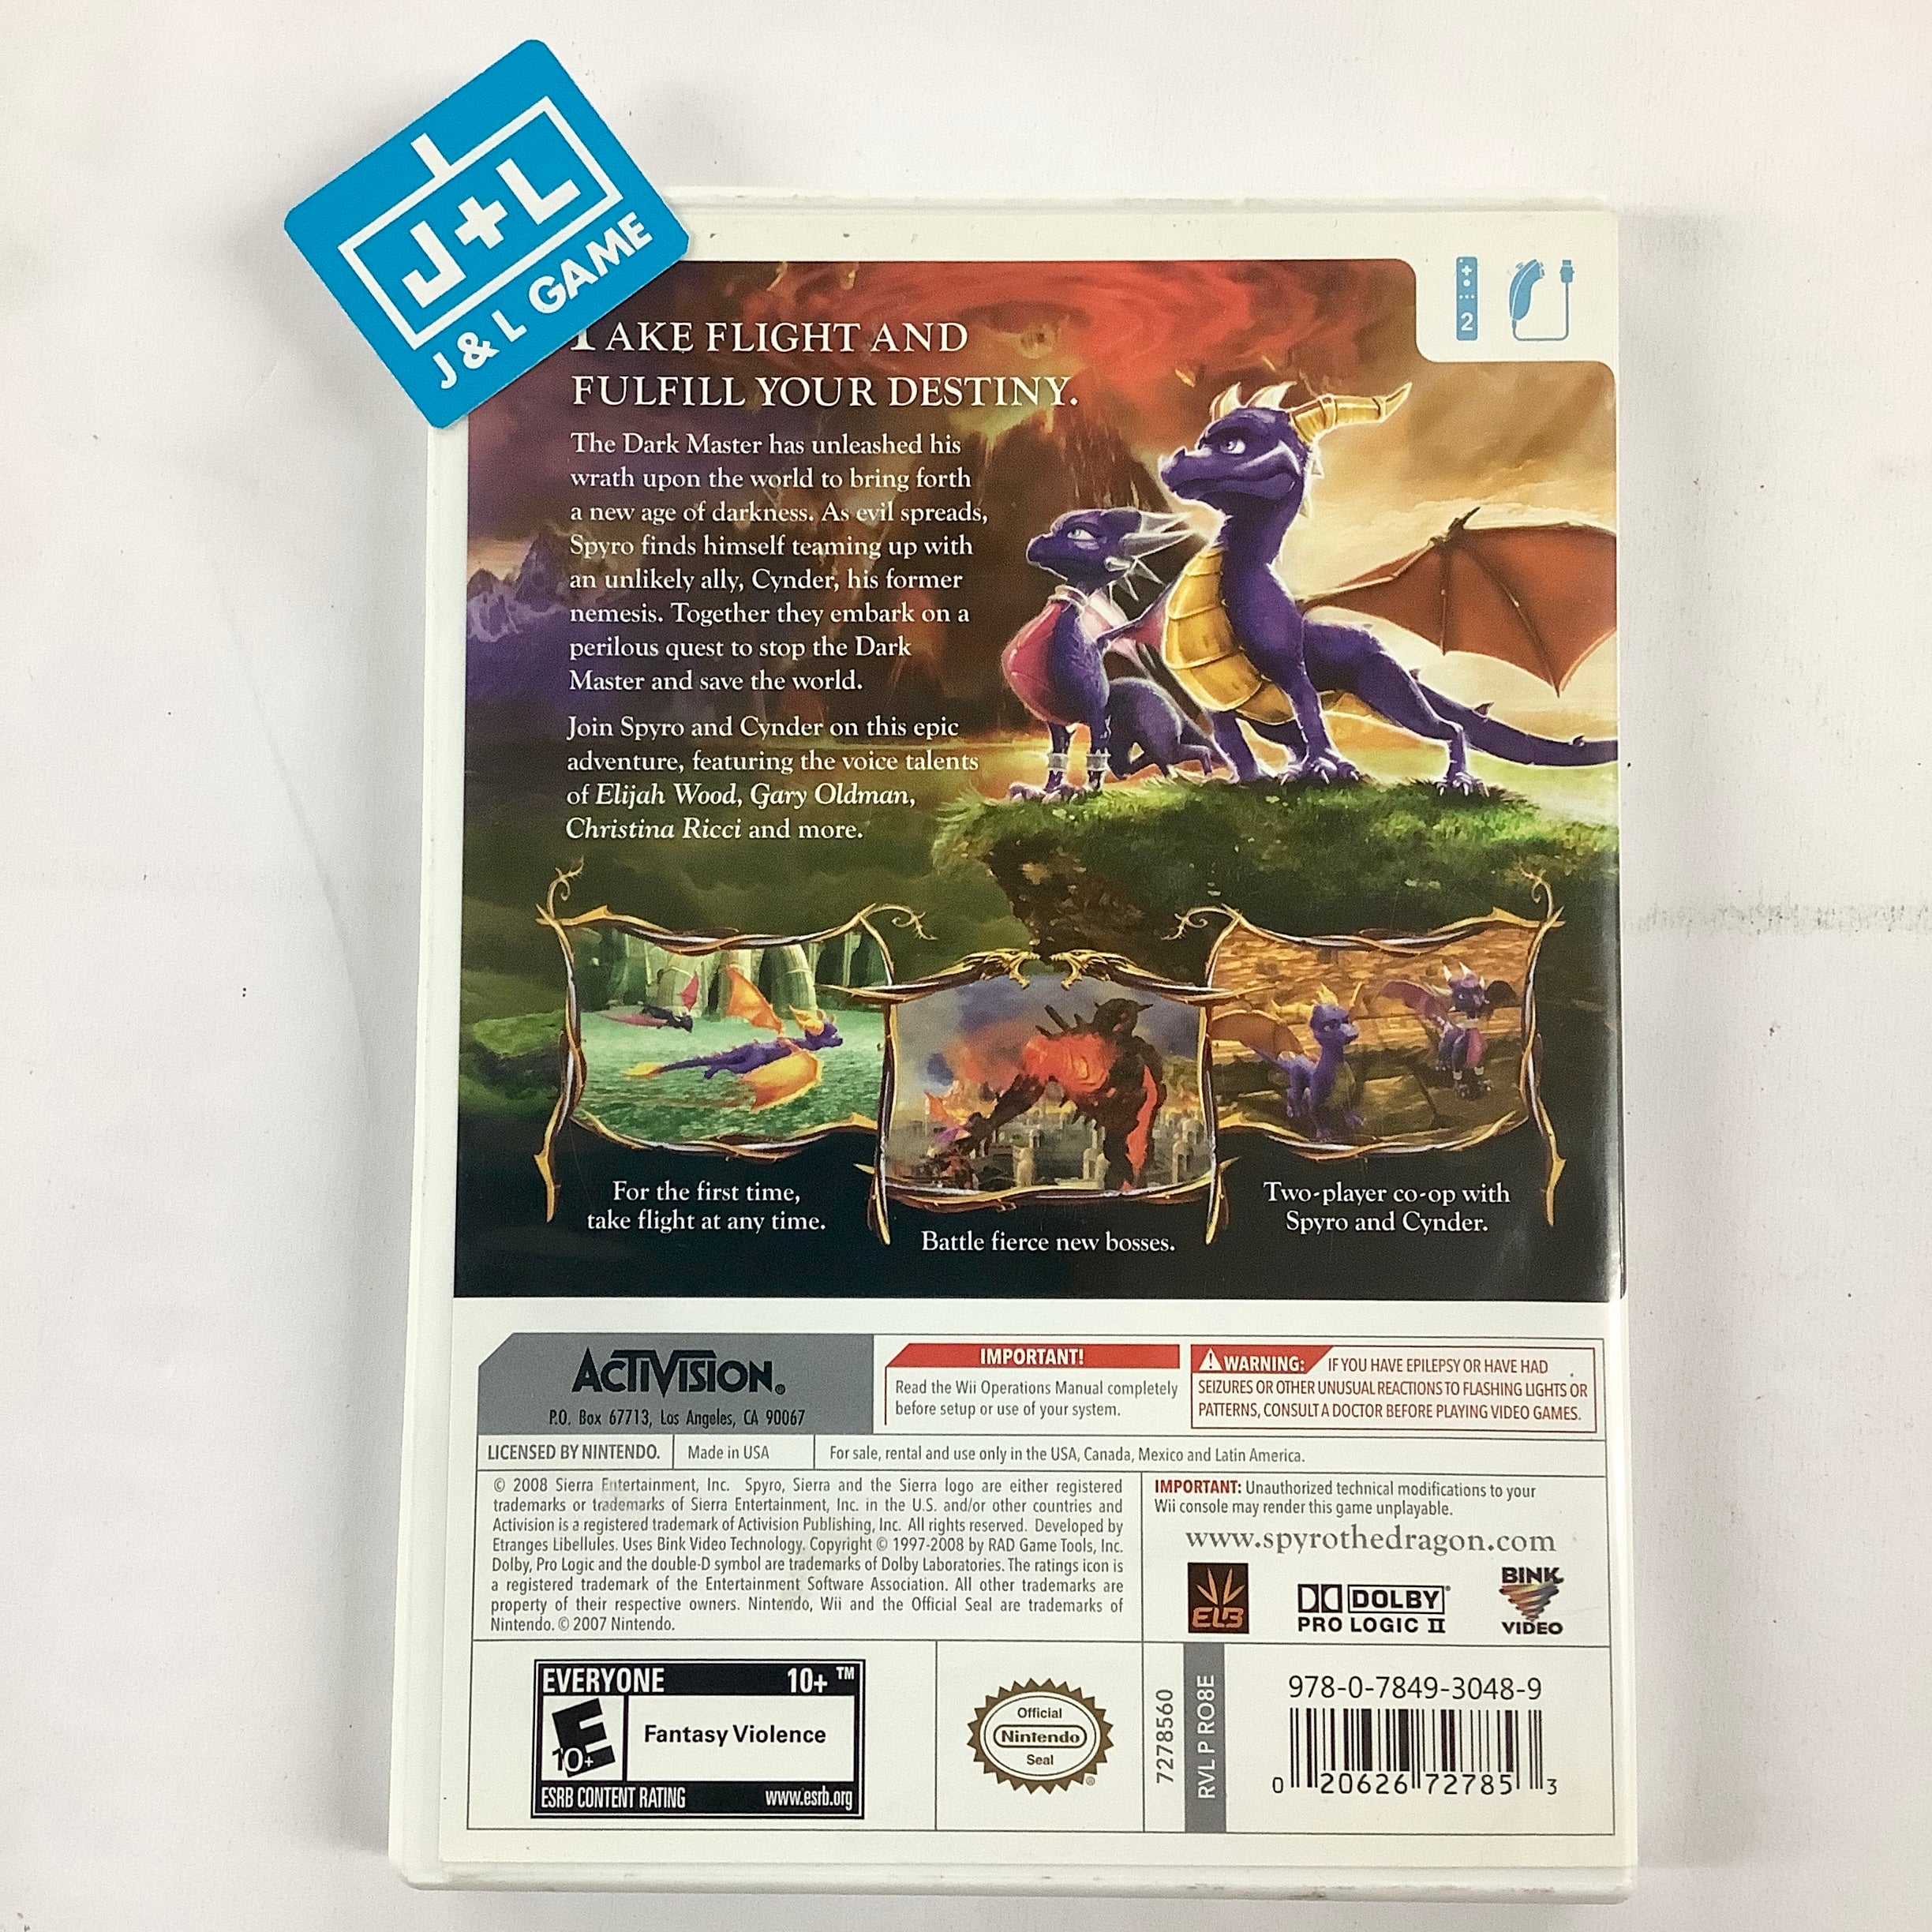 The Legend of Spyro: Dawn of the Dragon - Nintendo Wii [Pre-Owned] Video Games Activision   